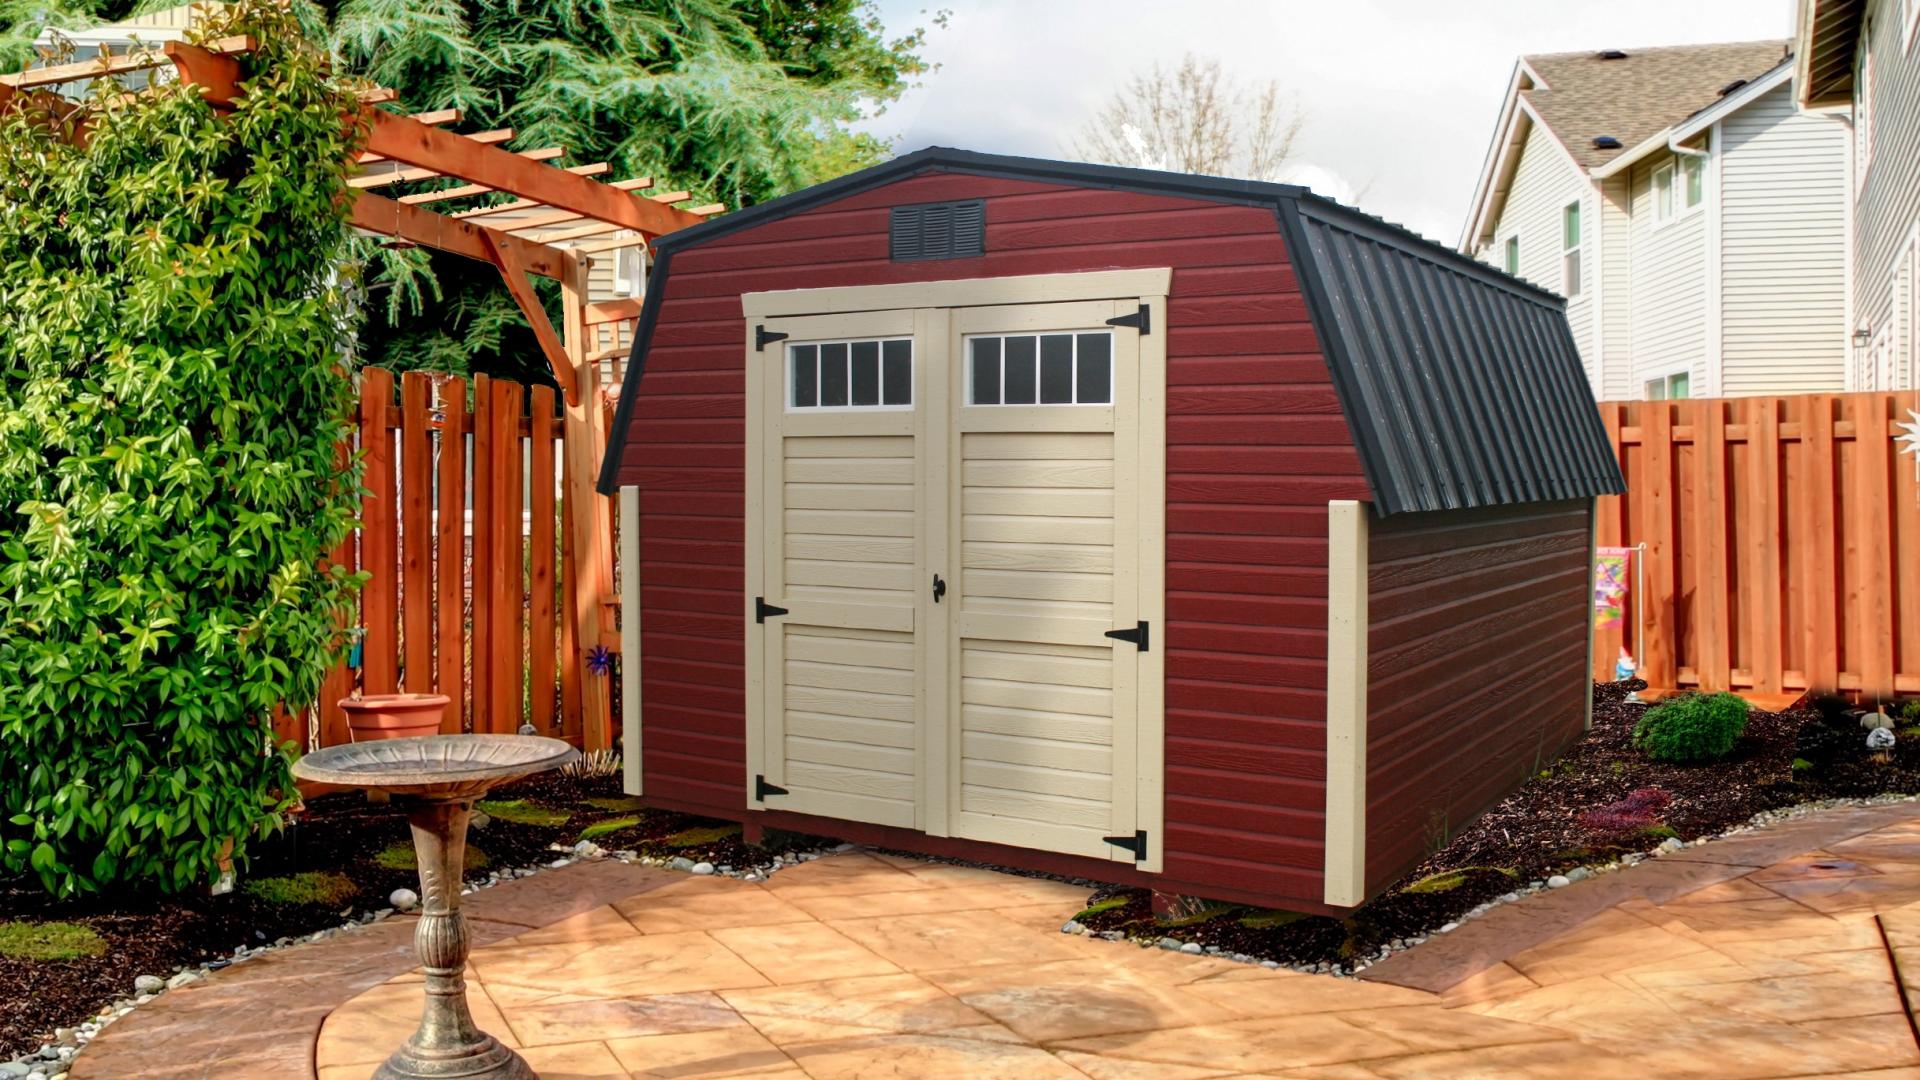 Red mini barn with white trim and black metal roof